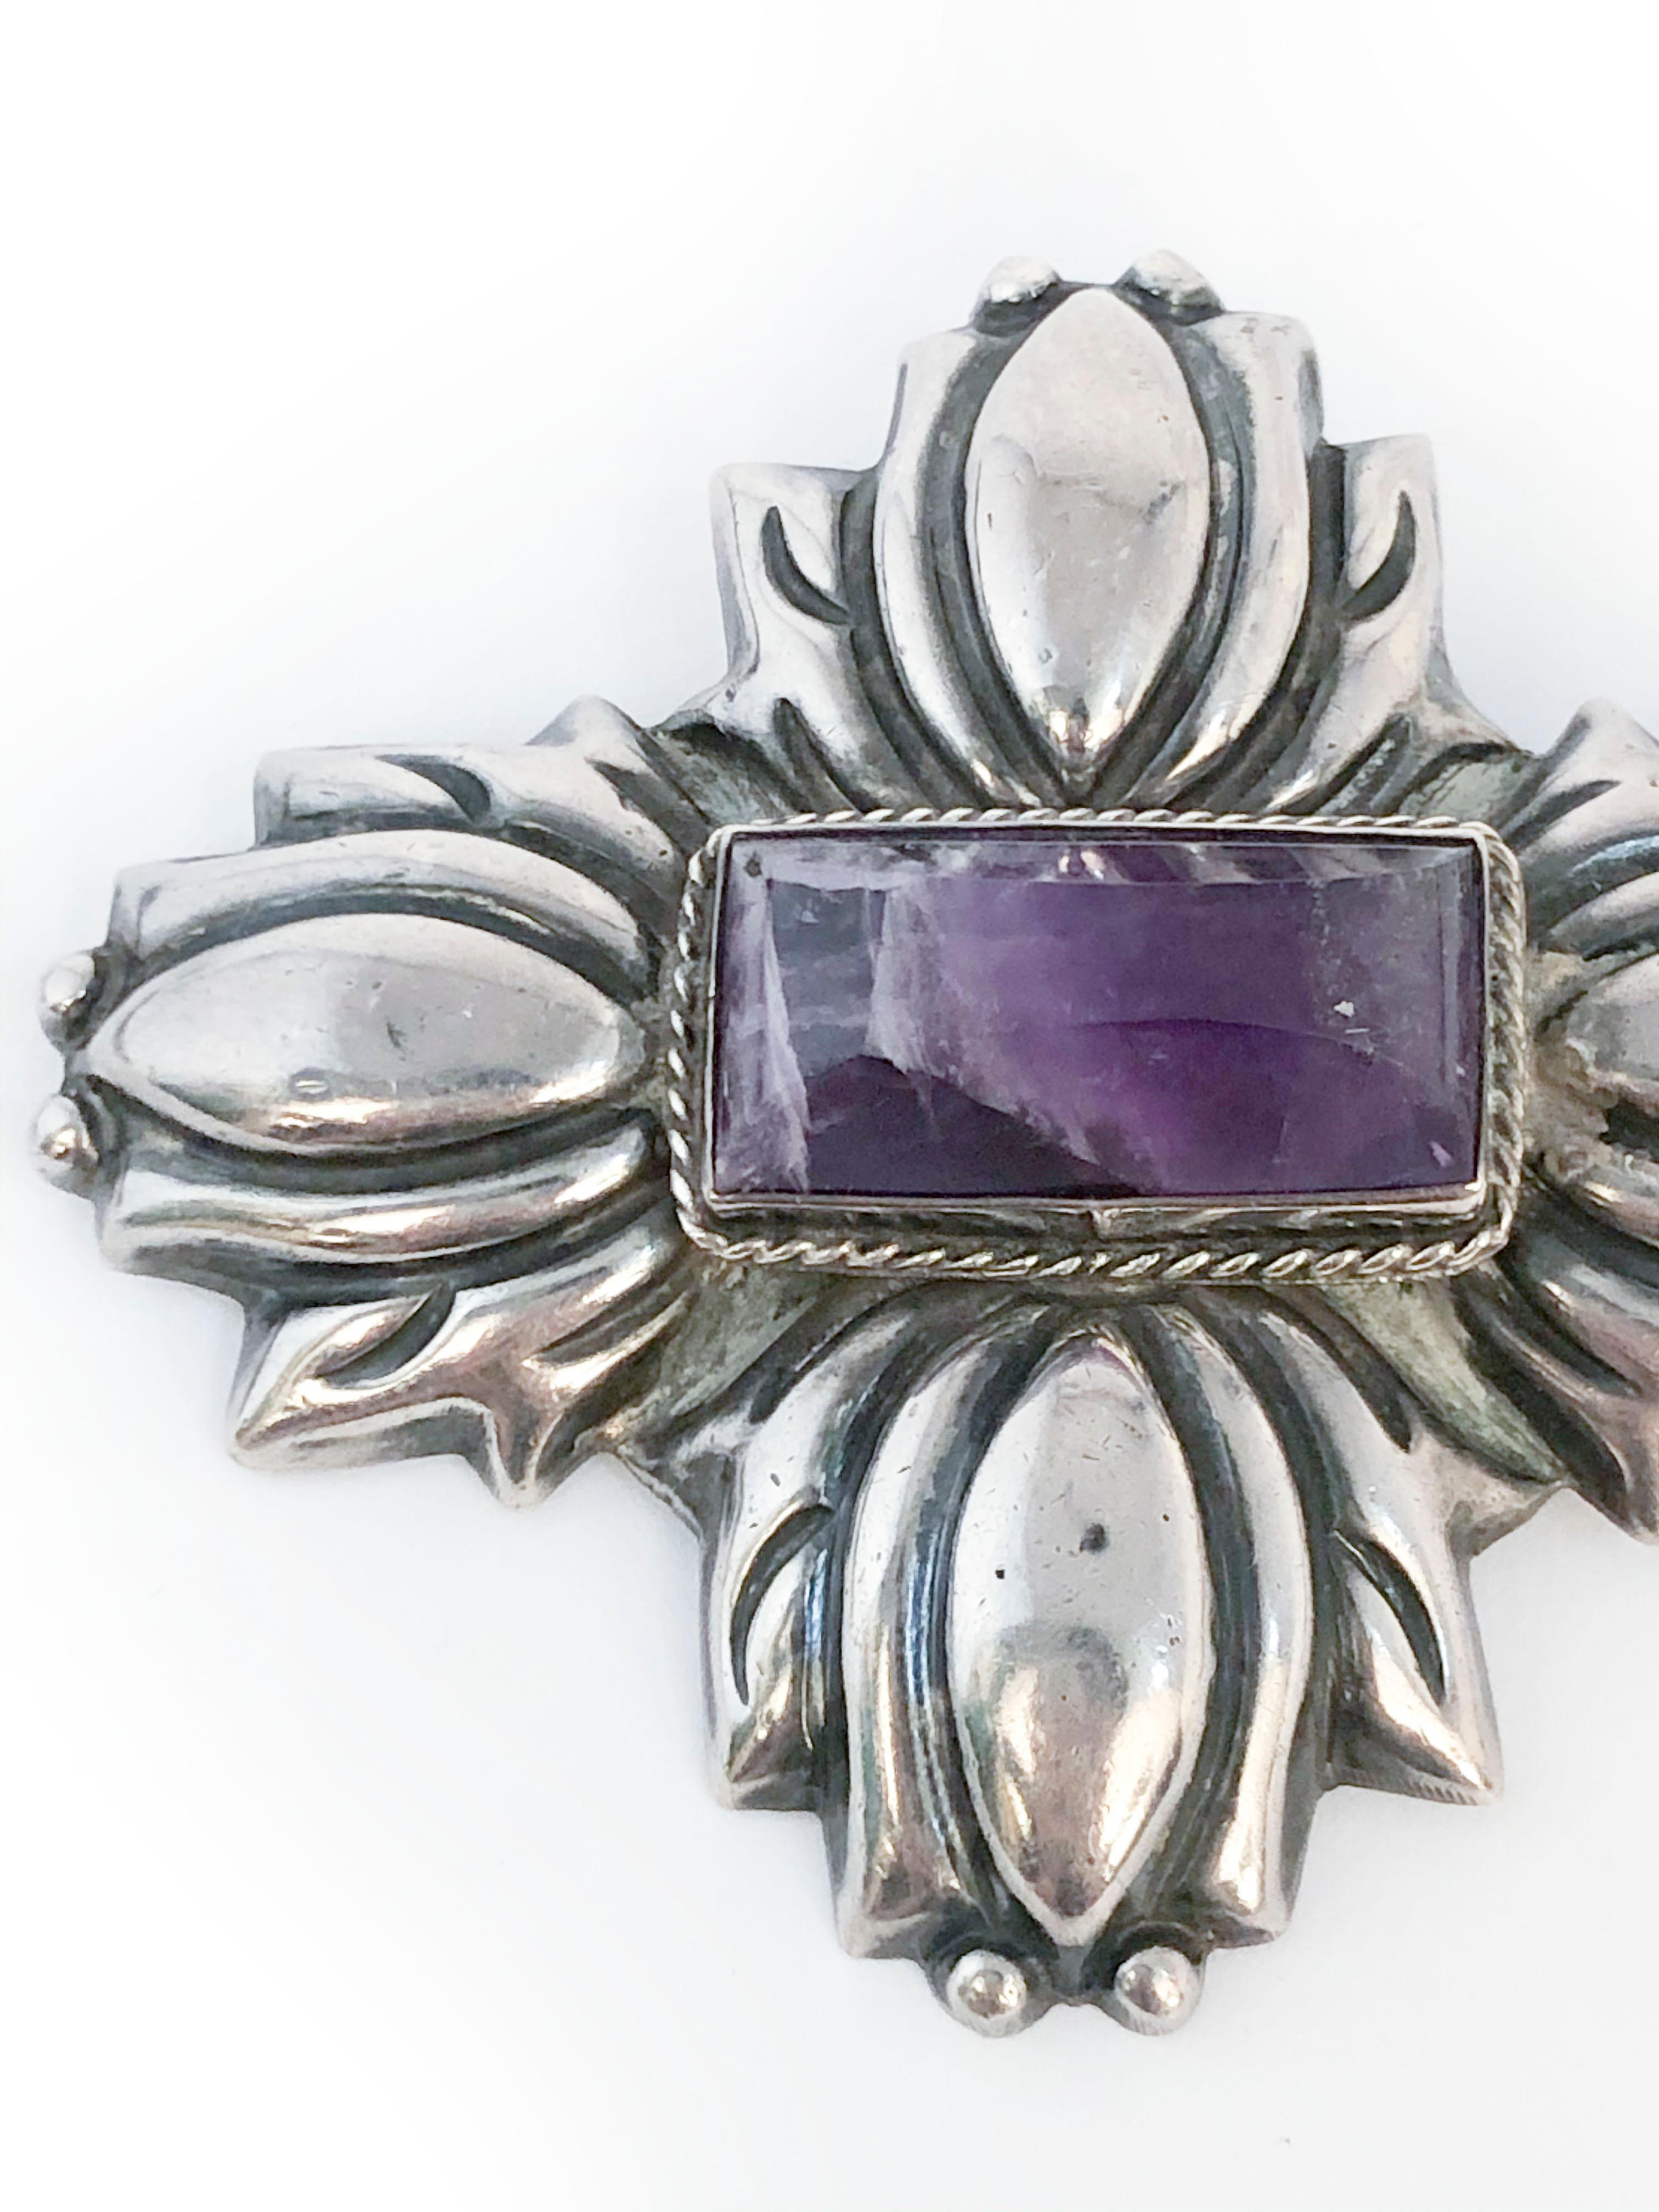 1940s Mexican silver brooch centered with a large marbled amethyst stone. The sliver is hand shaped into a floral tulip-like shape and a large long pin along the back of the brooch. 